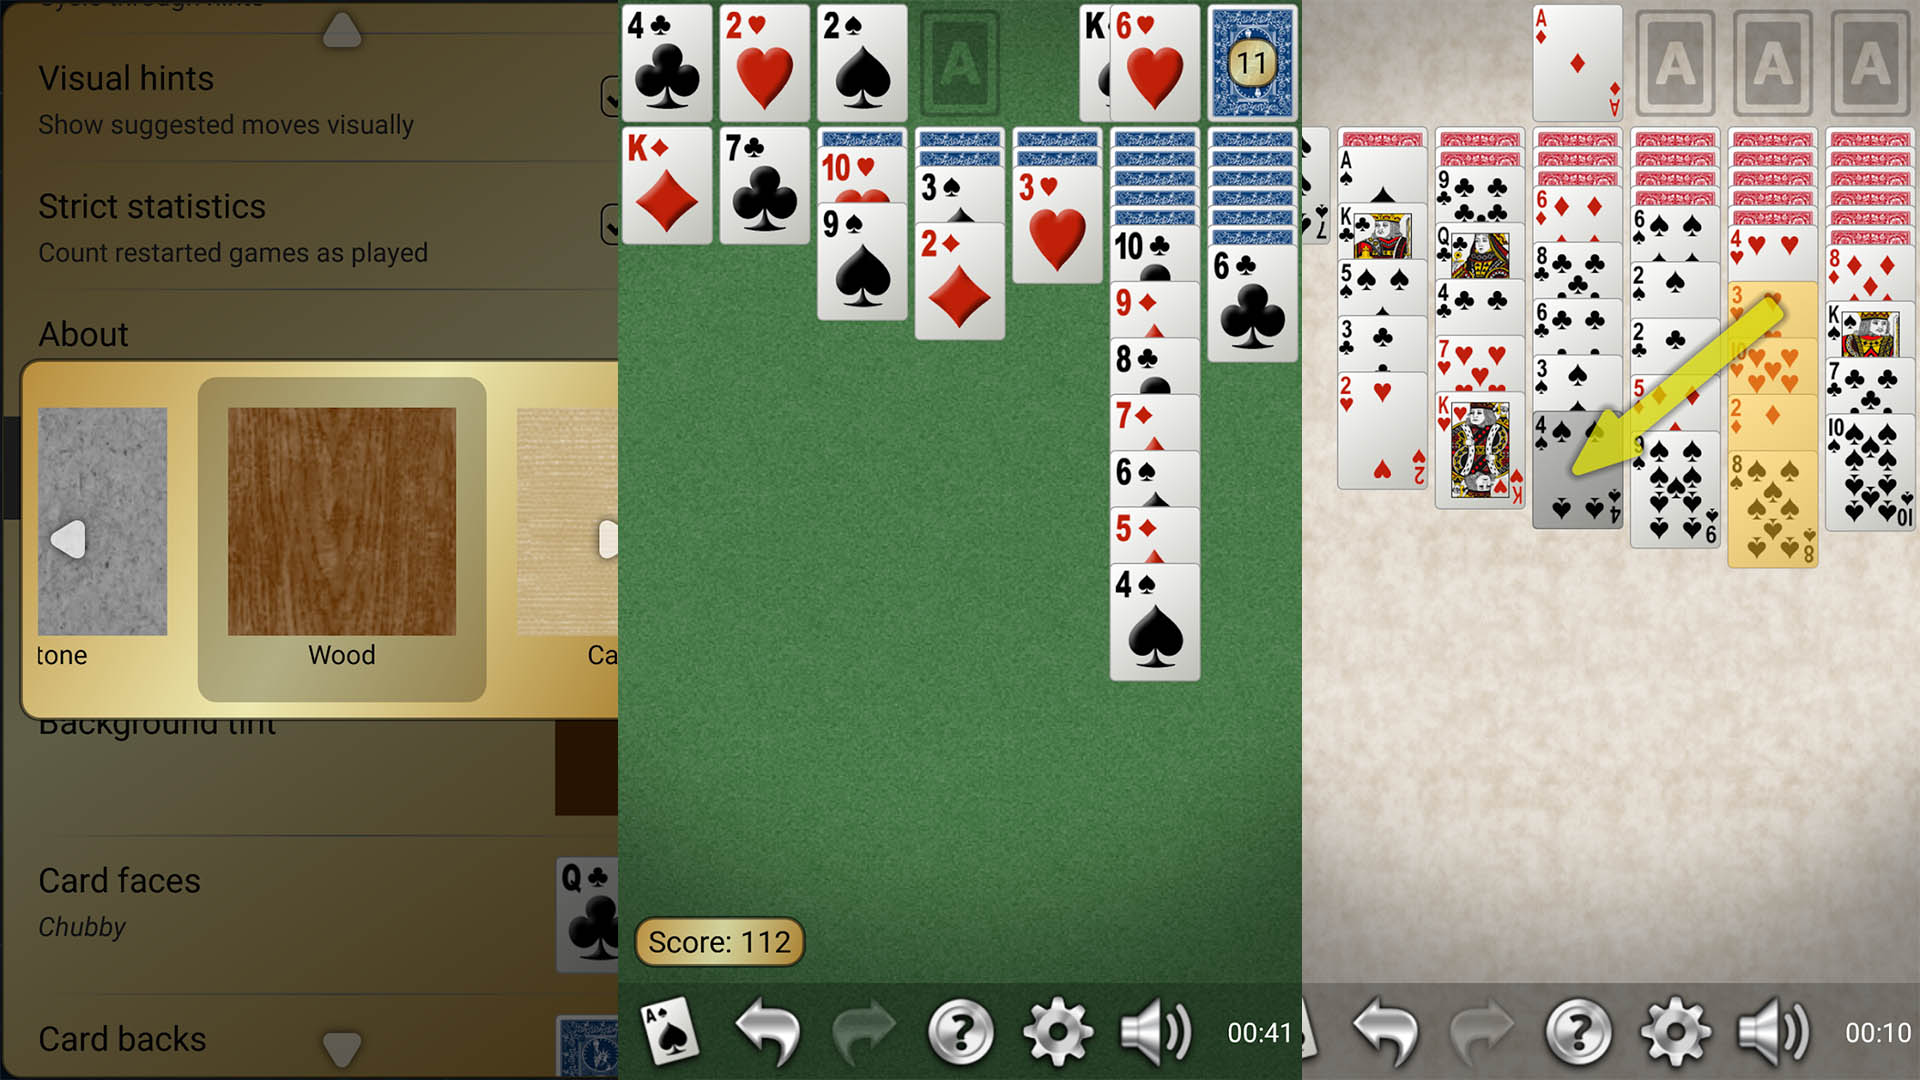 10 best solitaire games for Android - Android Authority